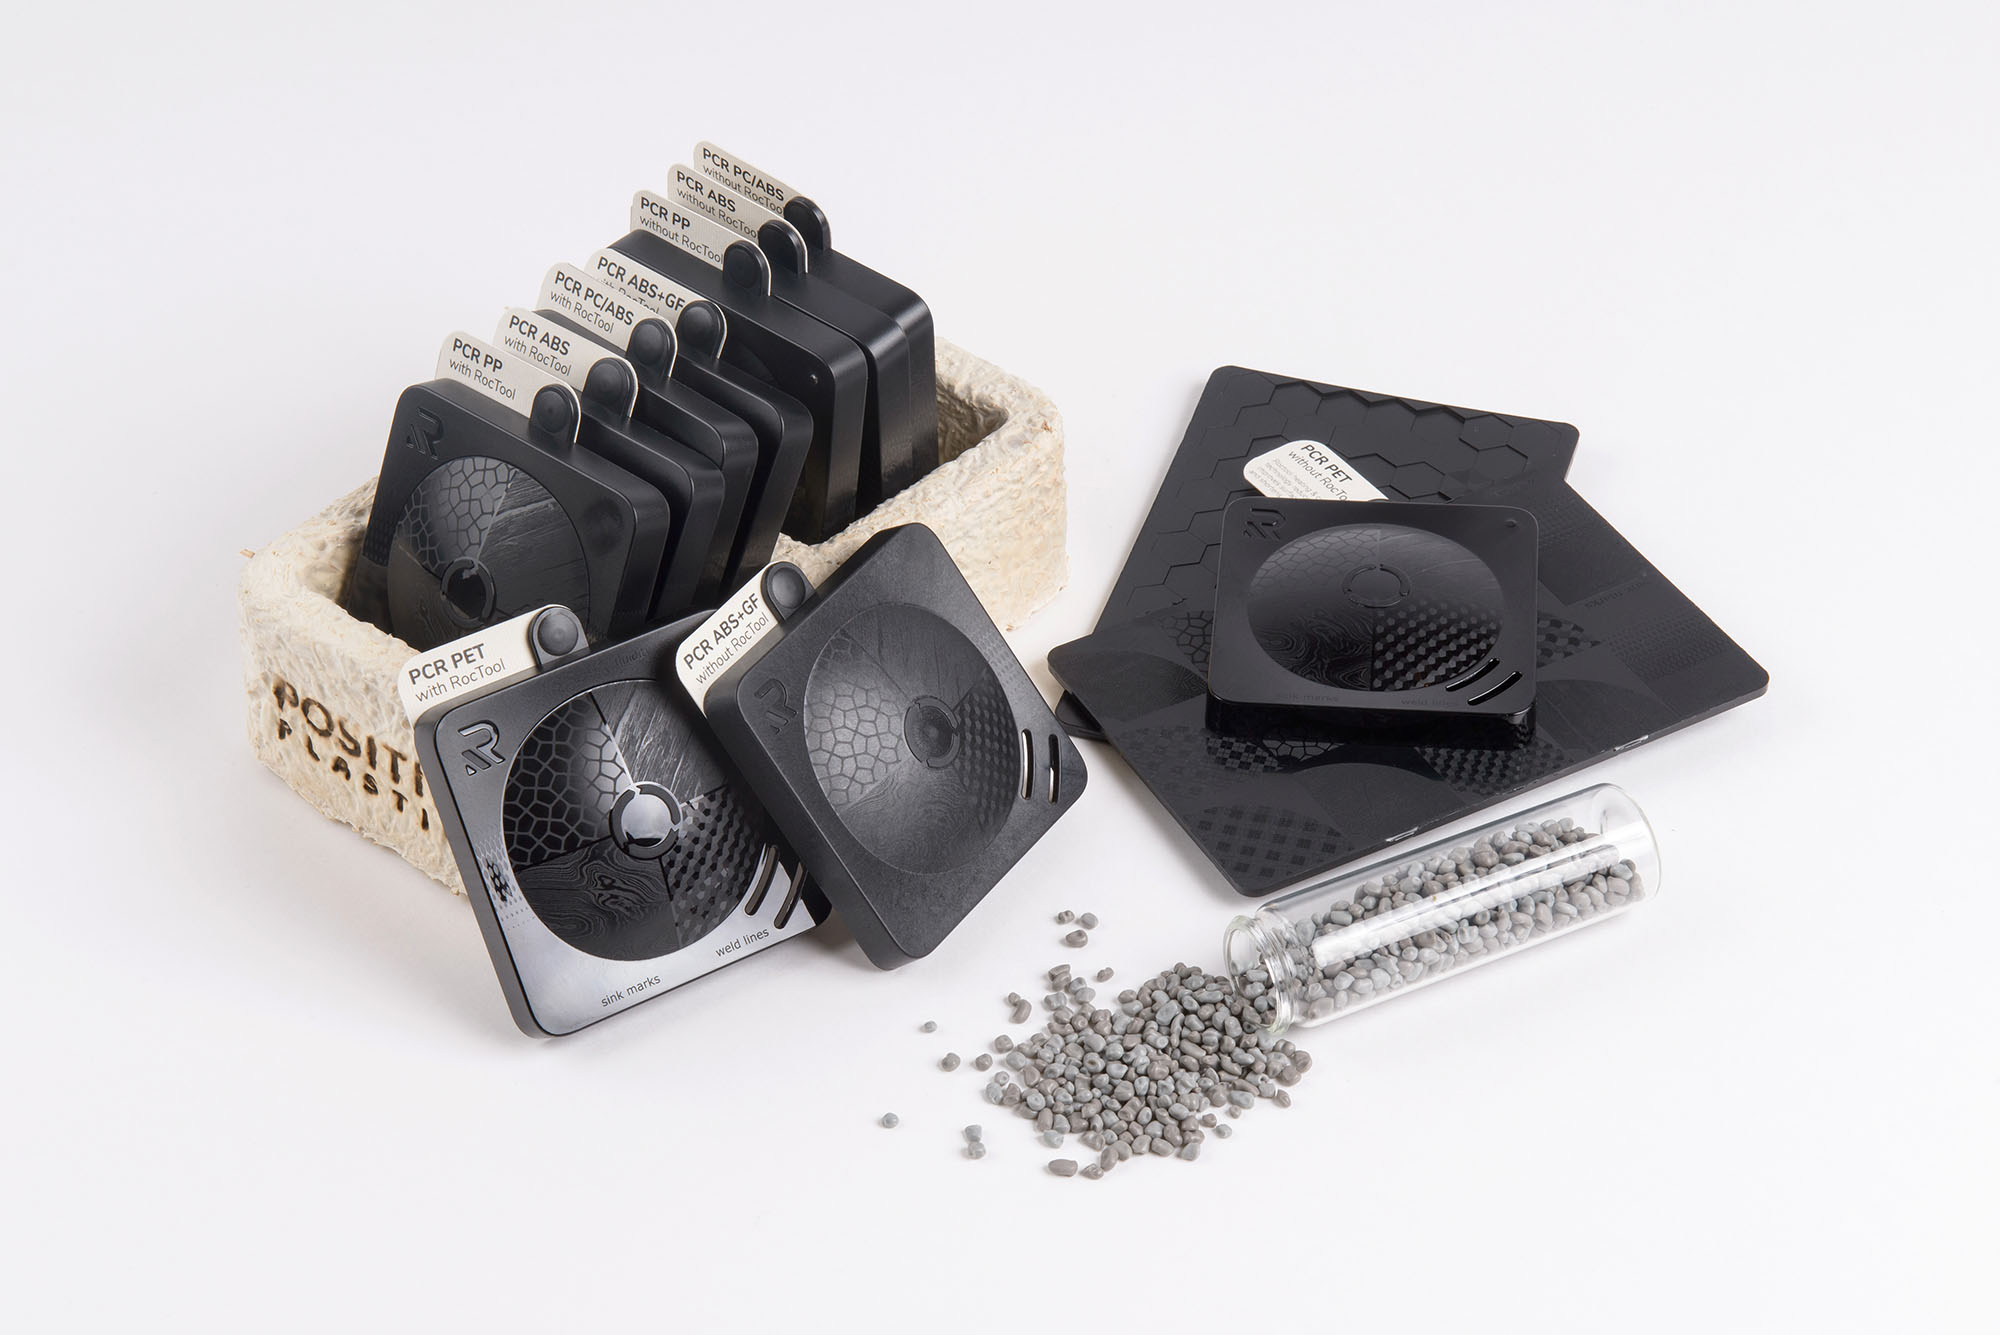 The group’s third collection of materials, due to be introduced next week at Fakuma, focuses on its collaboration with Roctool to highlight various surface qualities and textures, as well as some mechanical properties. 